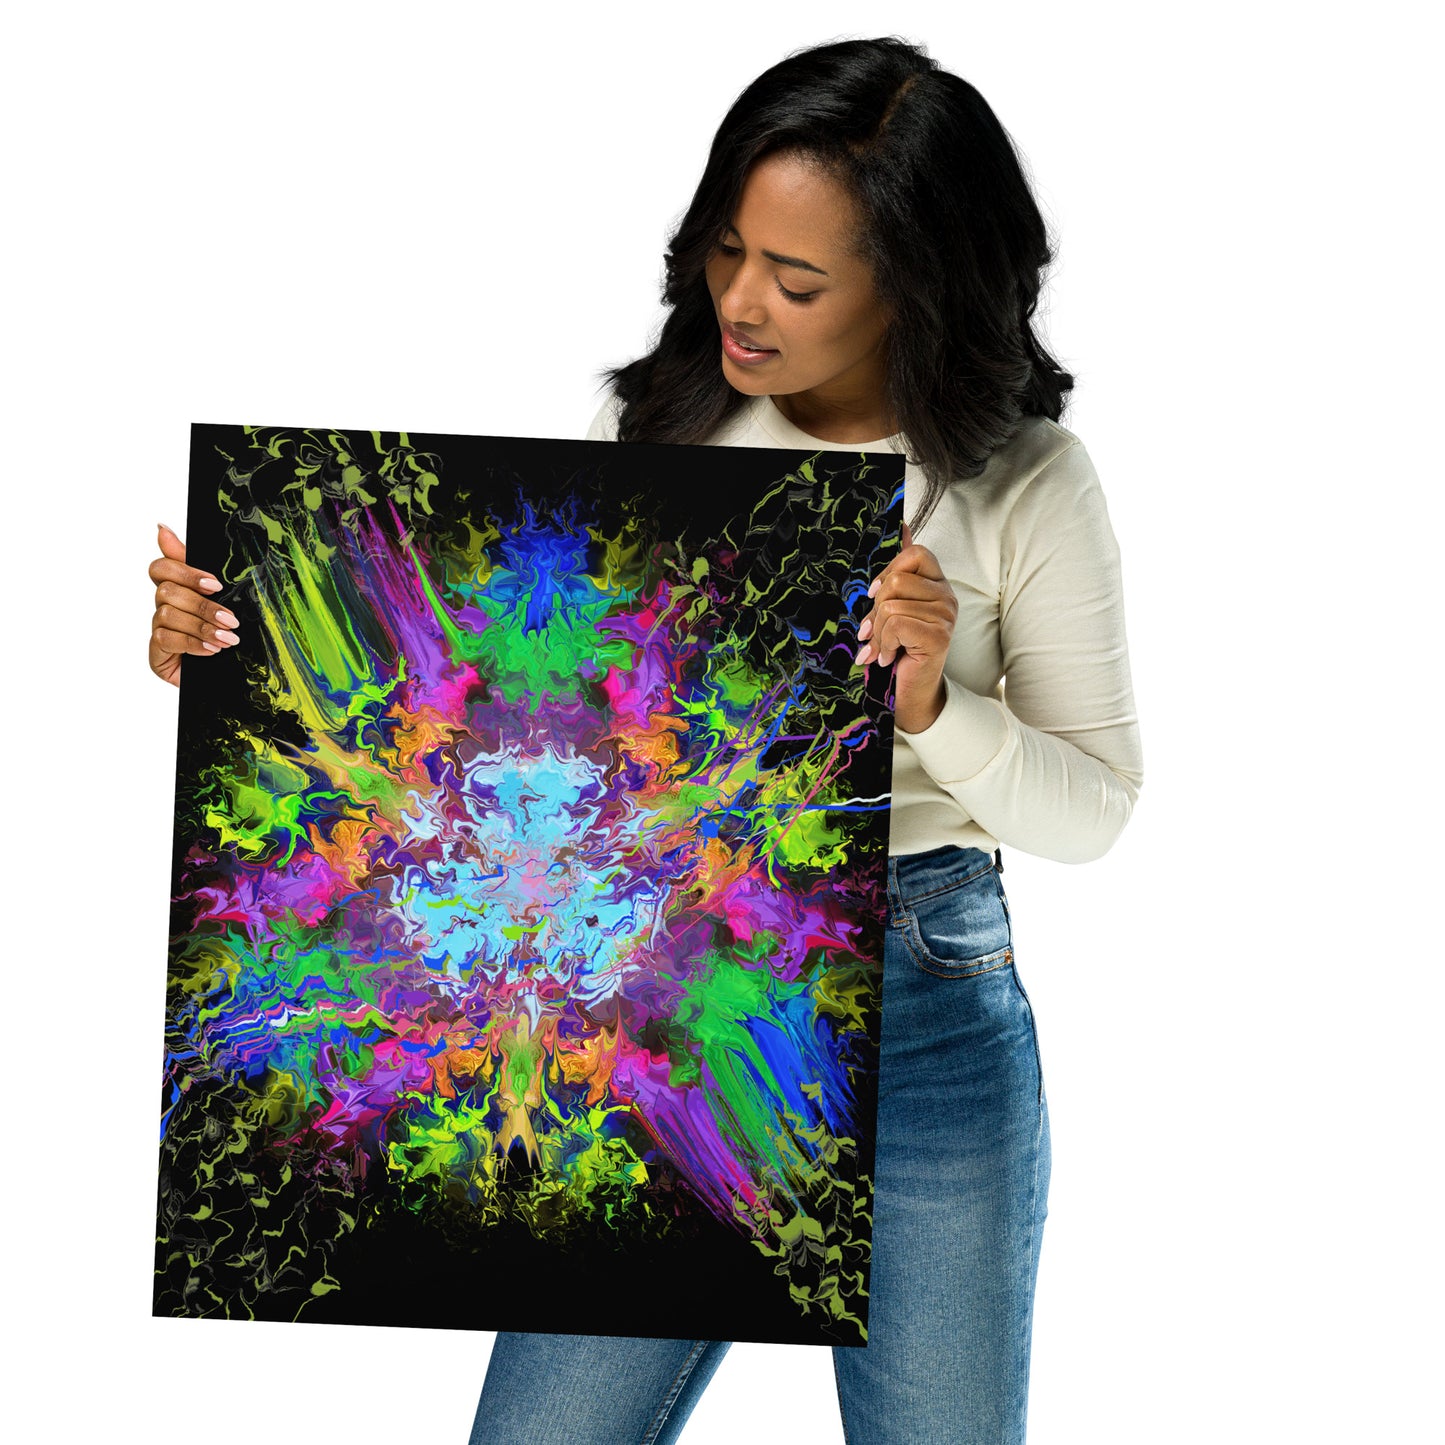 Glow Vibe (2016) Poster Print by Emmy Spoon